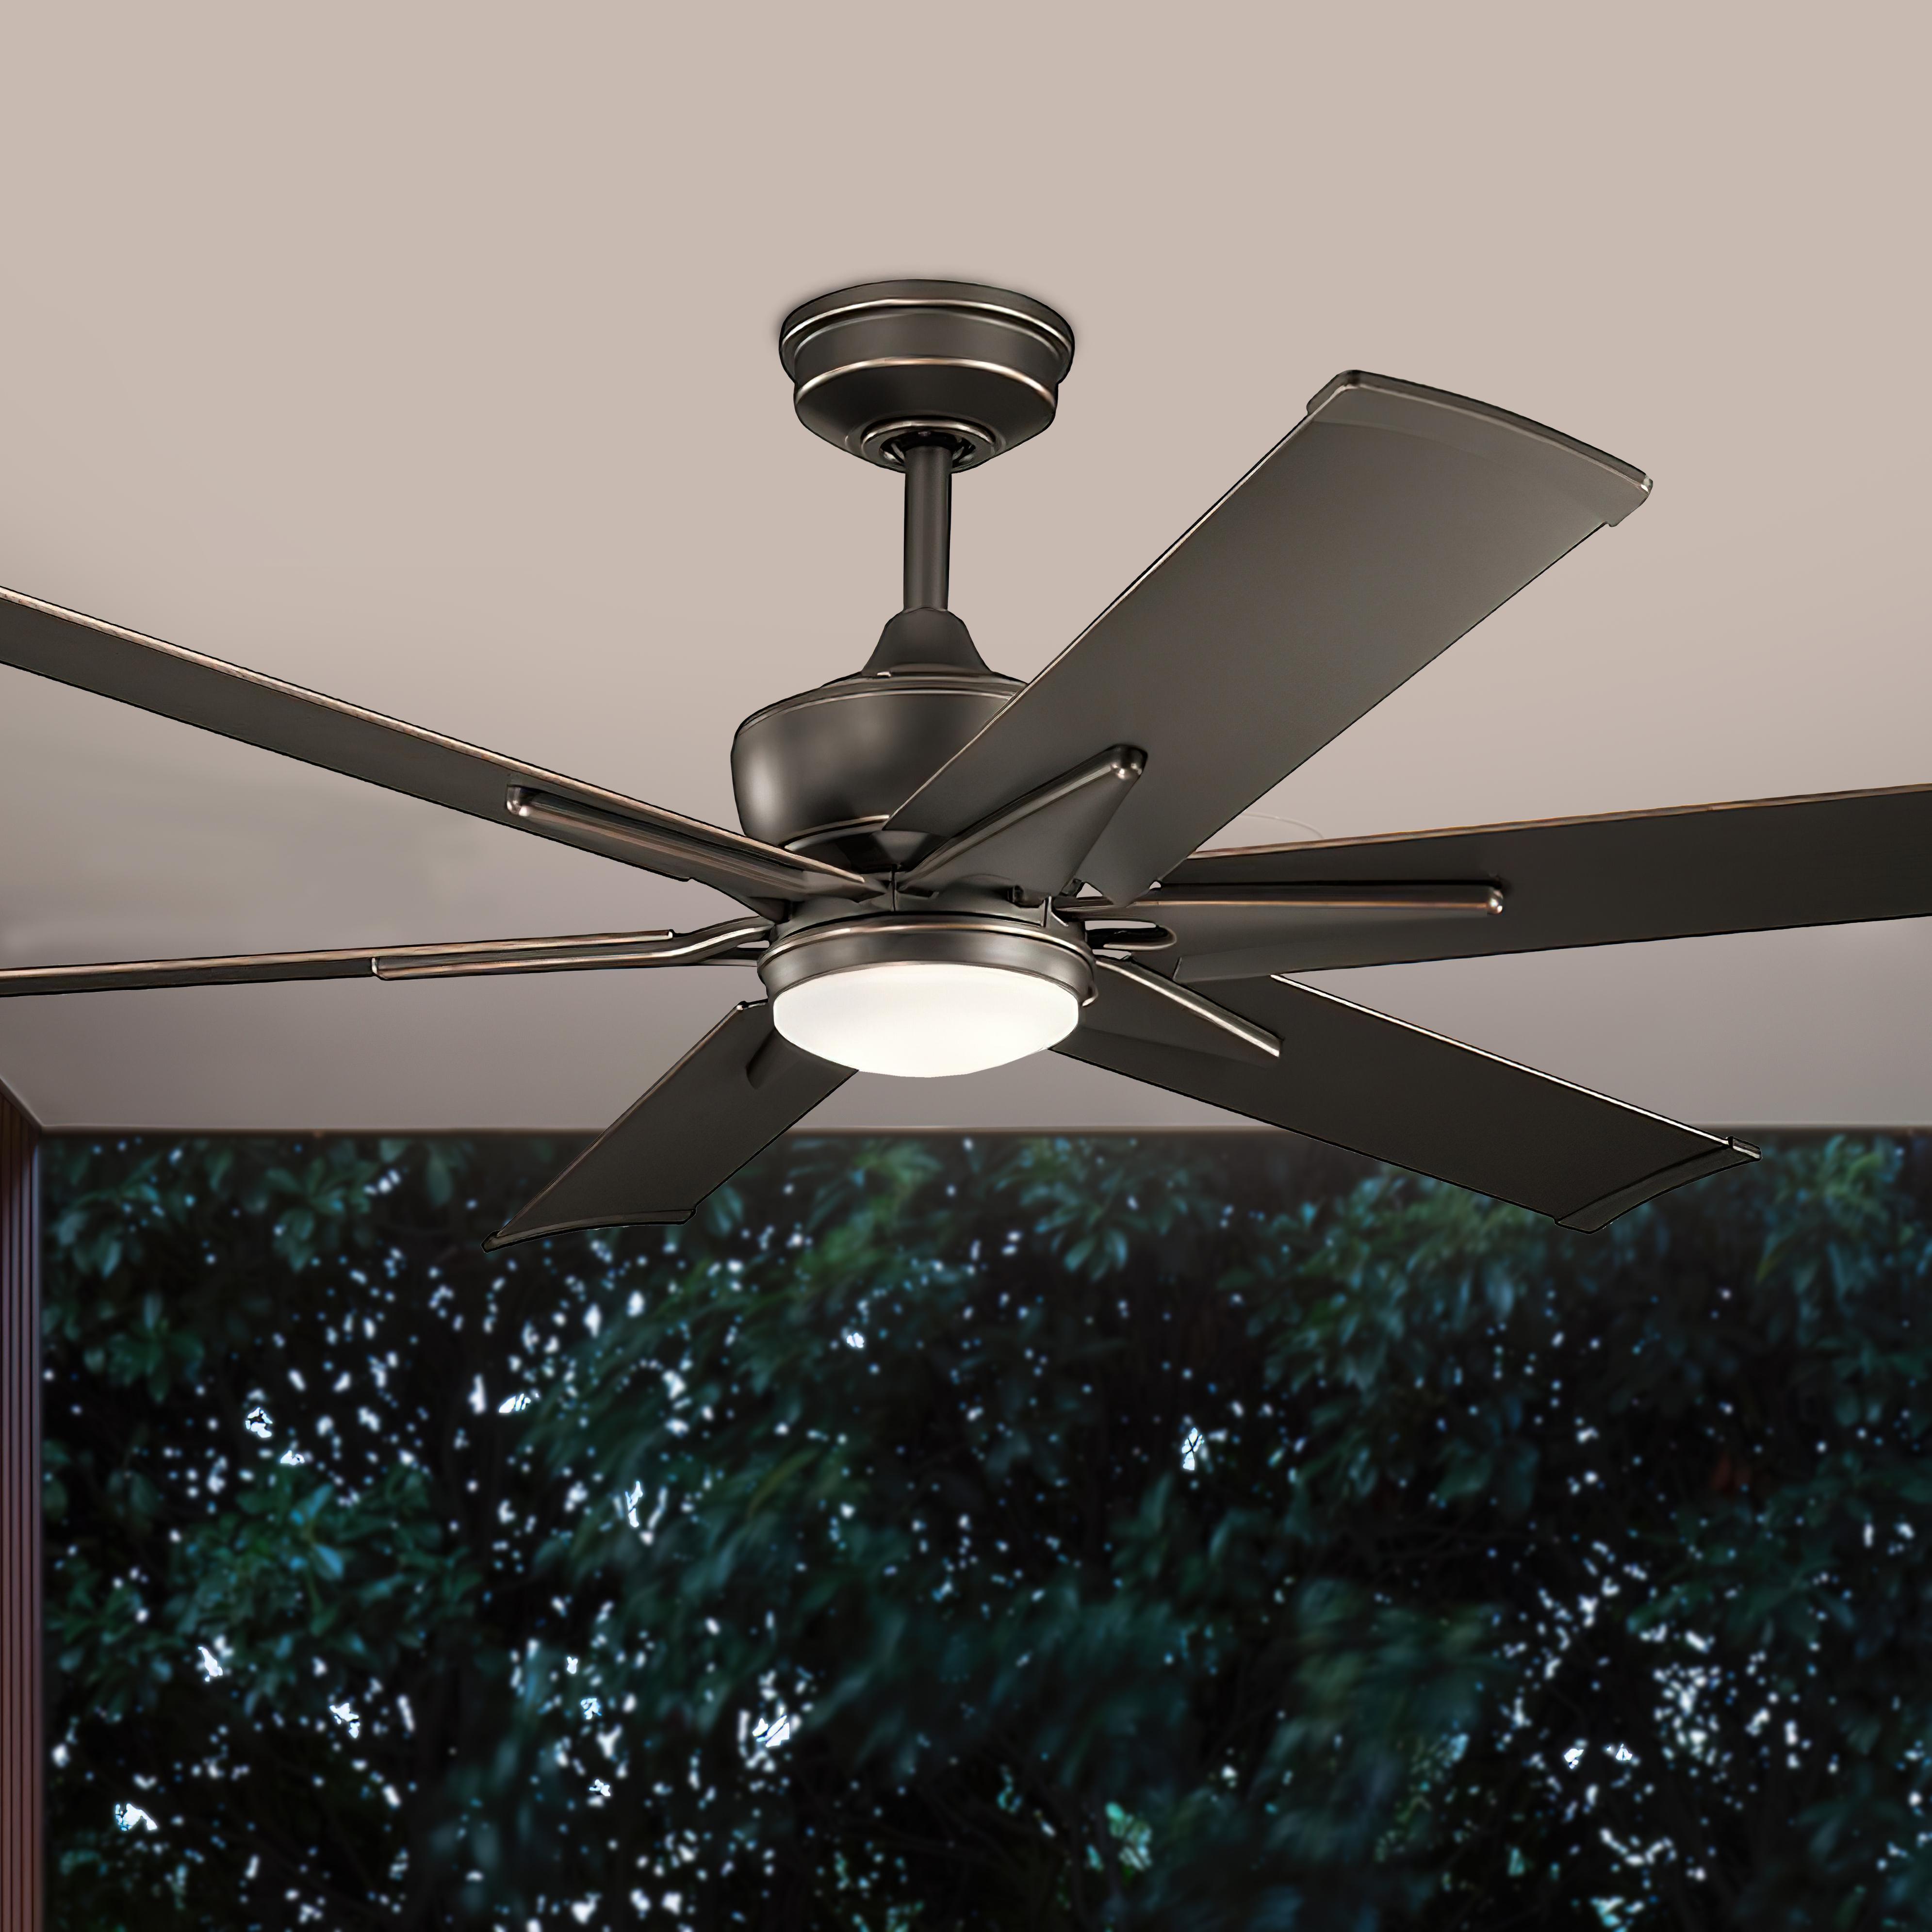 Szeplo Patio 60 Inch Windmill Outdoor Ceiling Fan With Light, Wall Control Included